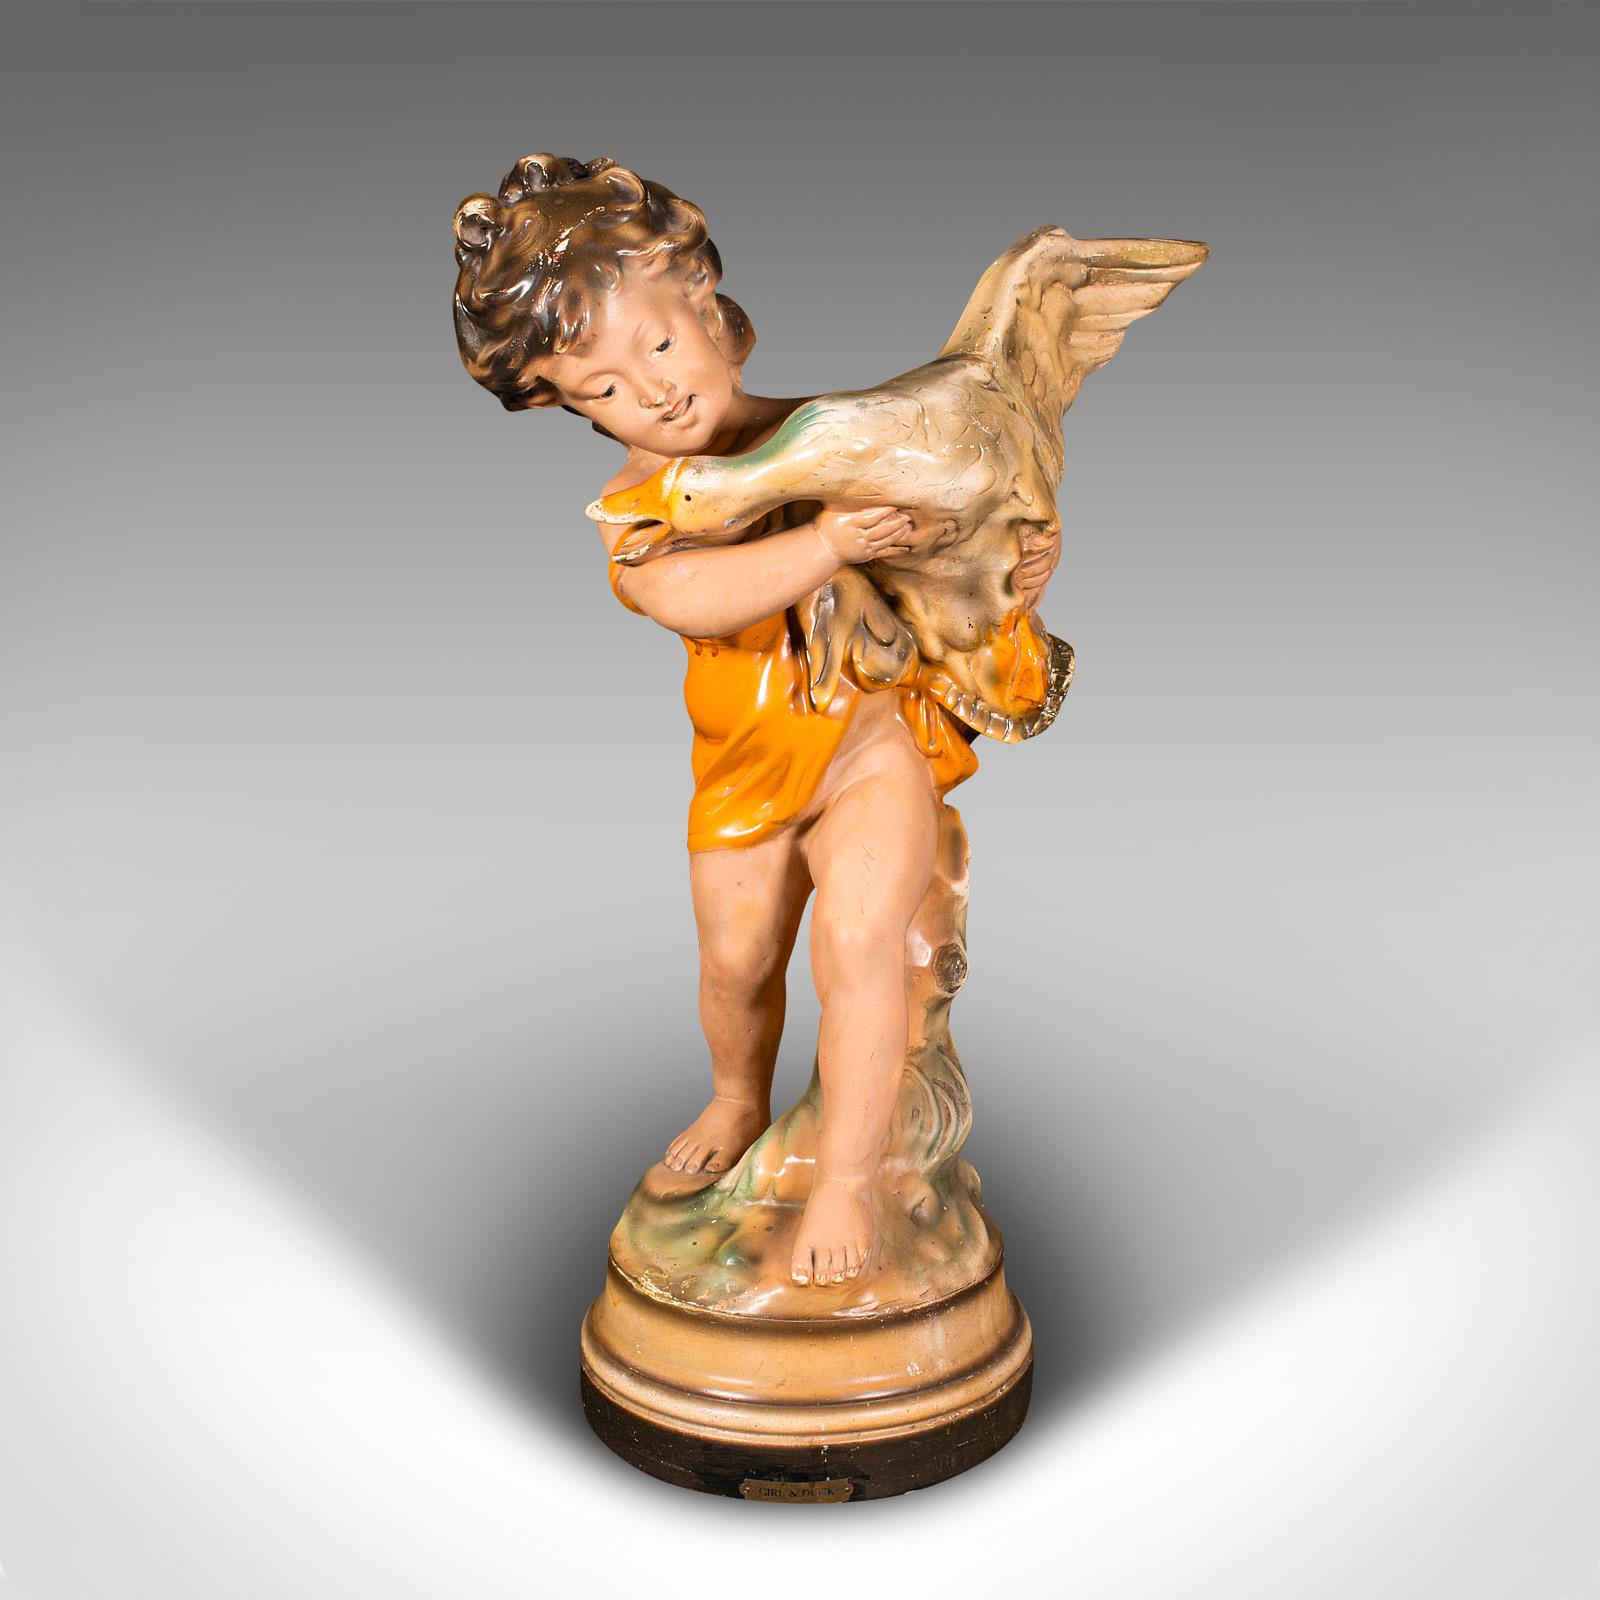 This is a large vintage display figure. An English, plasterwork decorative girl with duck ornament, dating to the Art Deco period, circa 1930.

A chaotic moment, with the unruly duck scrabbling in the girl's arms
Displays a desirable aged patina and